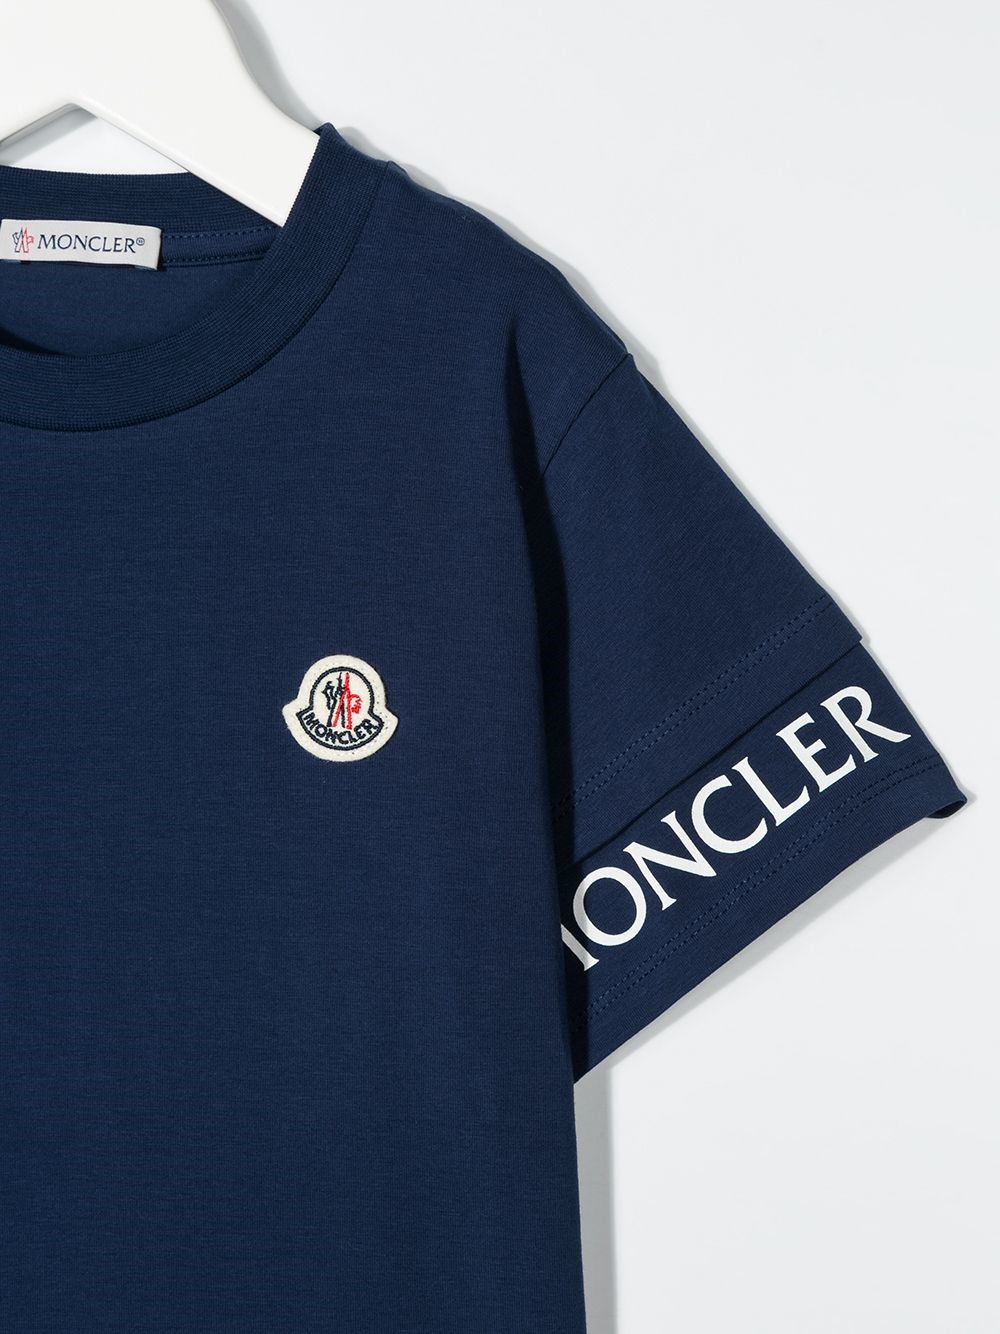 moncler kids T-SHIRT 8/10Y available on 